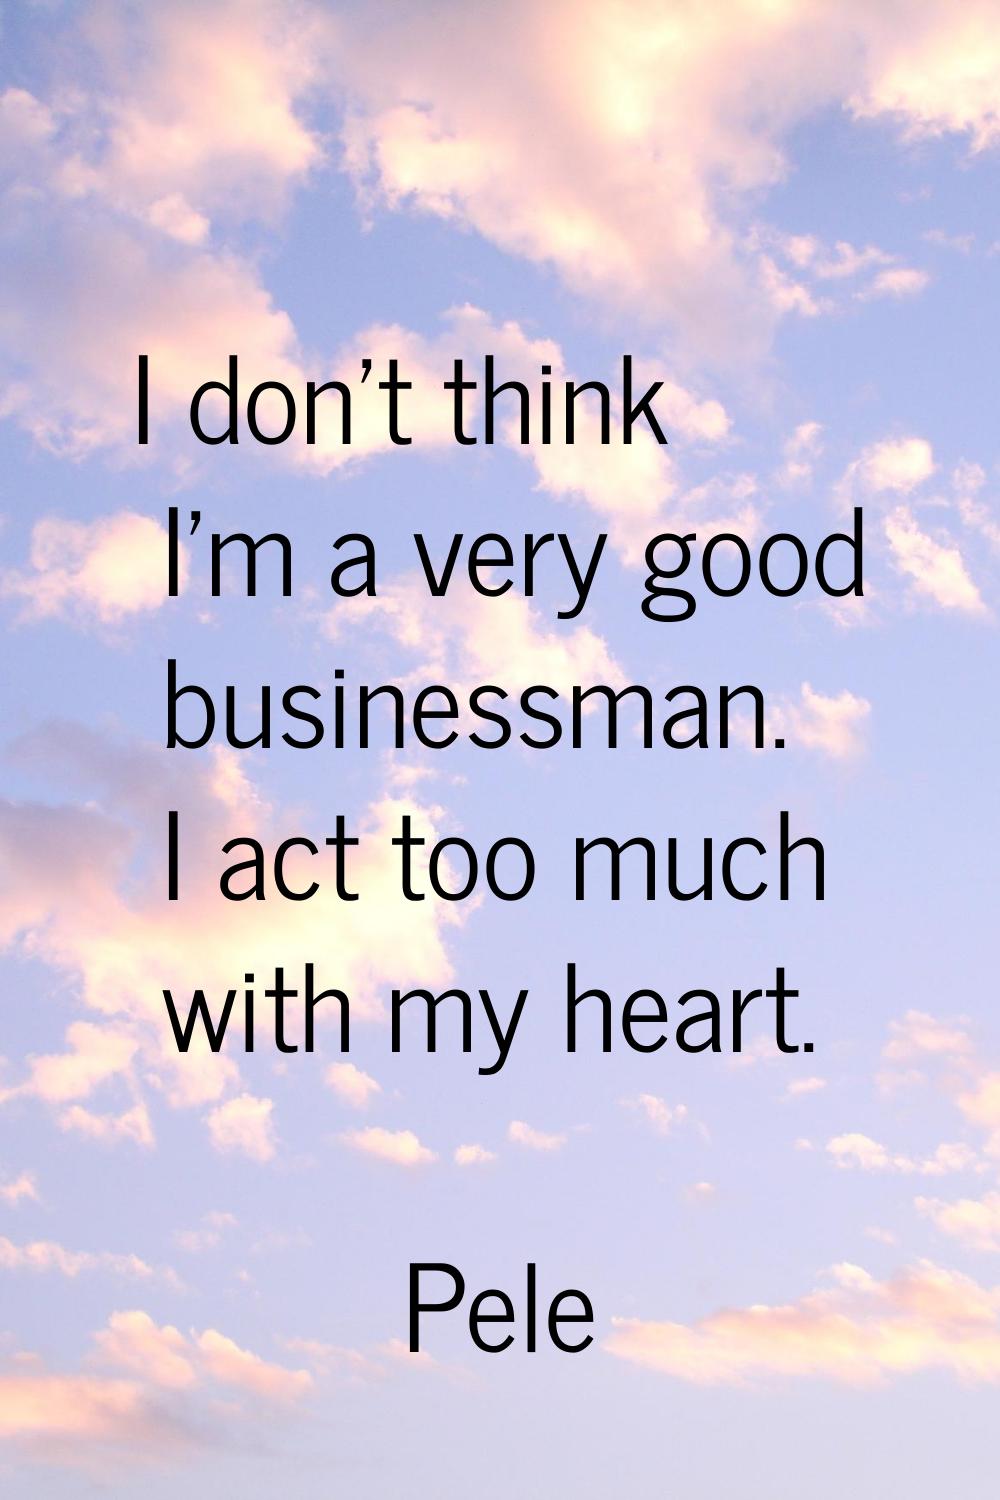 I don't think I'm a very good businessman. I act too much with my heart.